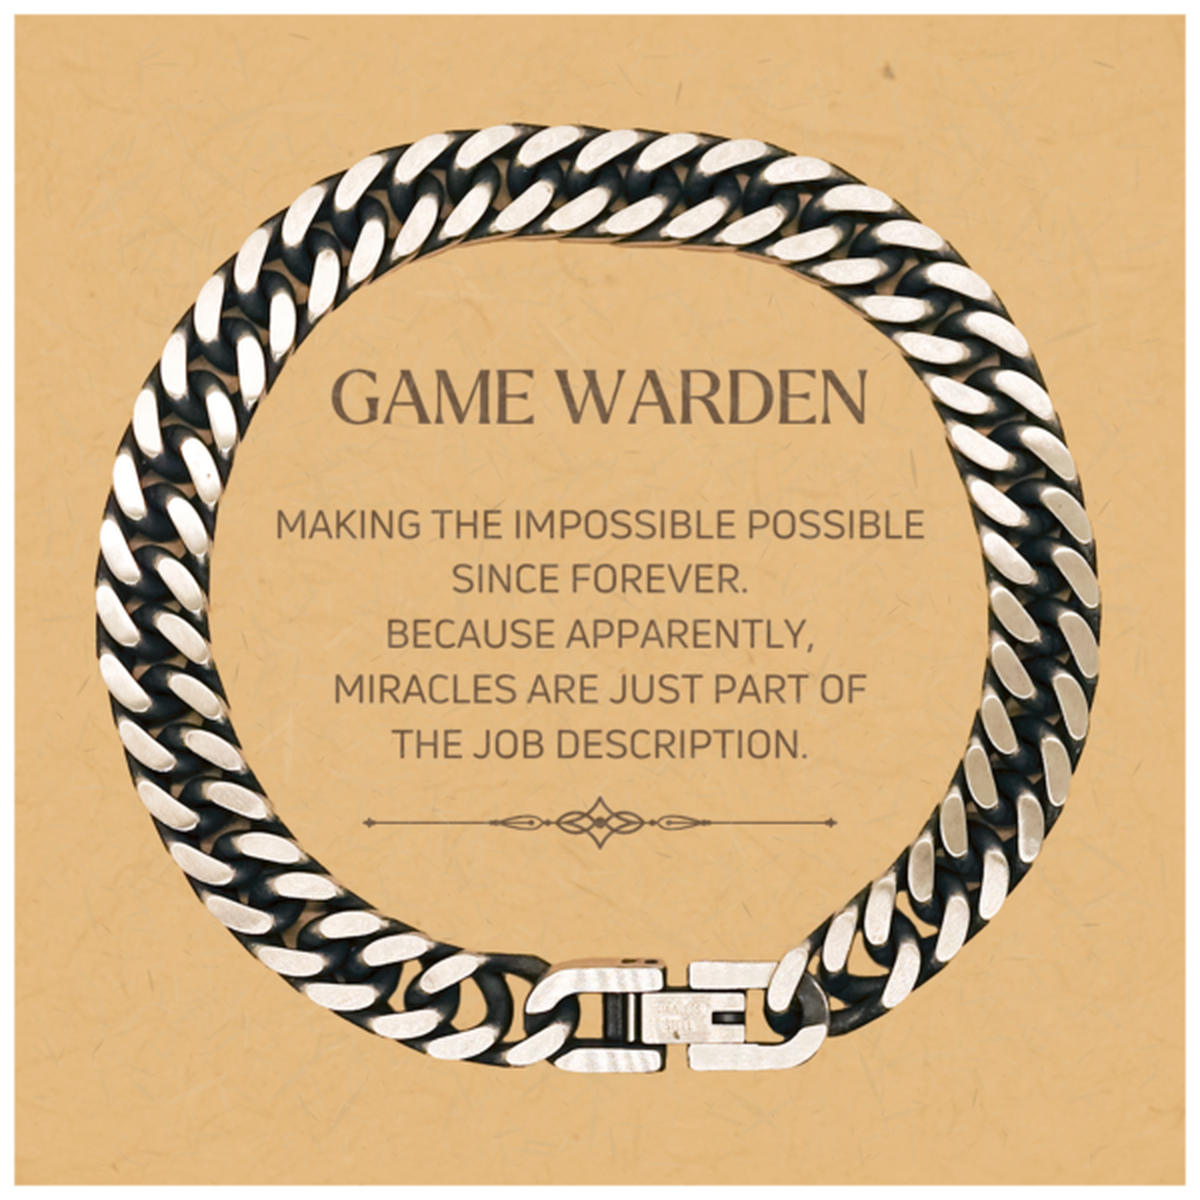 Funny Game Warden Gifts, Miracles are just part of the job description, Inspirational Birthday Christmas Cuban Link Chain Bracelet For Game Warden, Men, Women, Coworkers, Friends, Boss